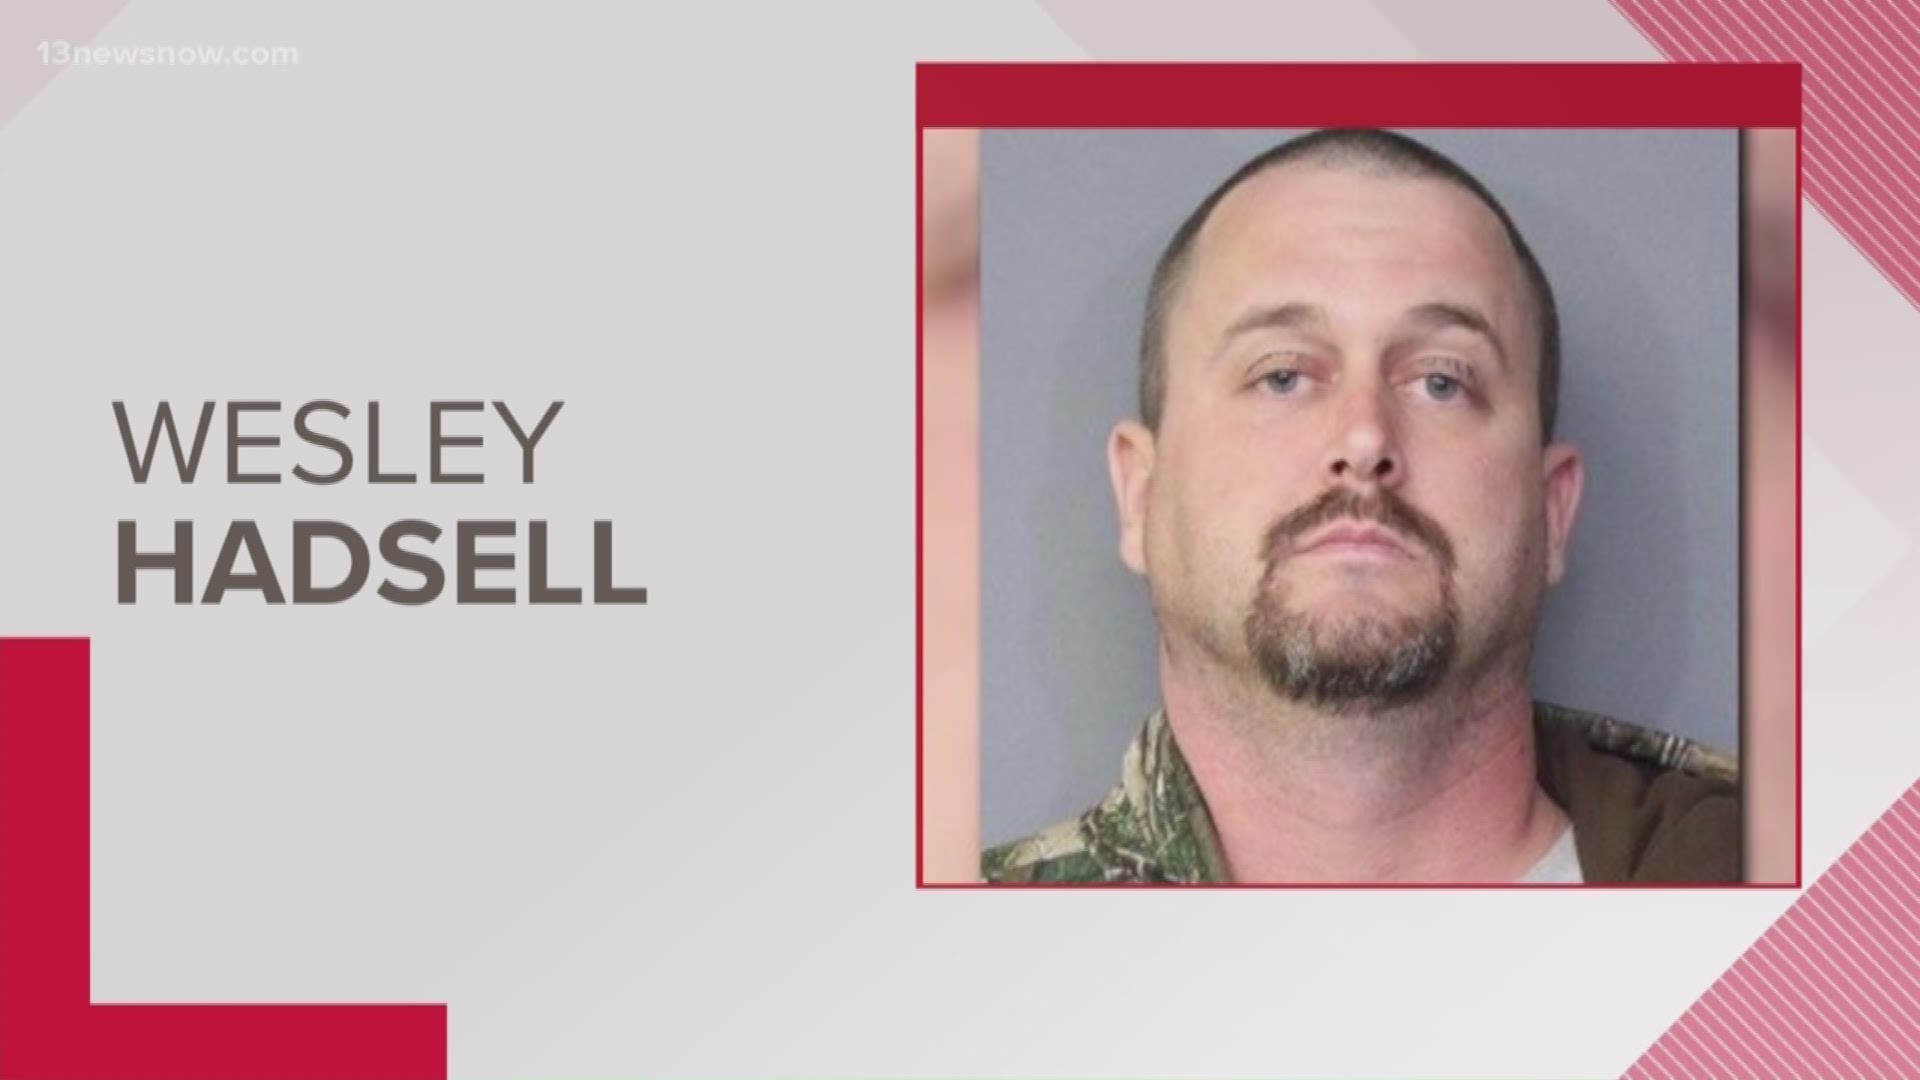 Wesley Hadsell has been charged with the murder of his 18-year-old stepdaughter AJ Hadsell.